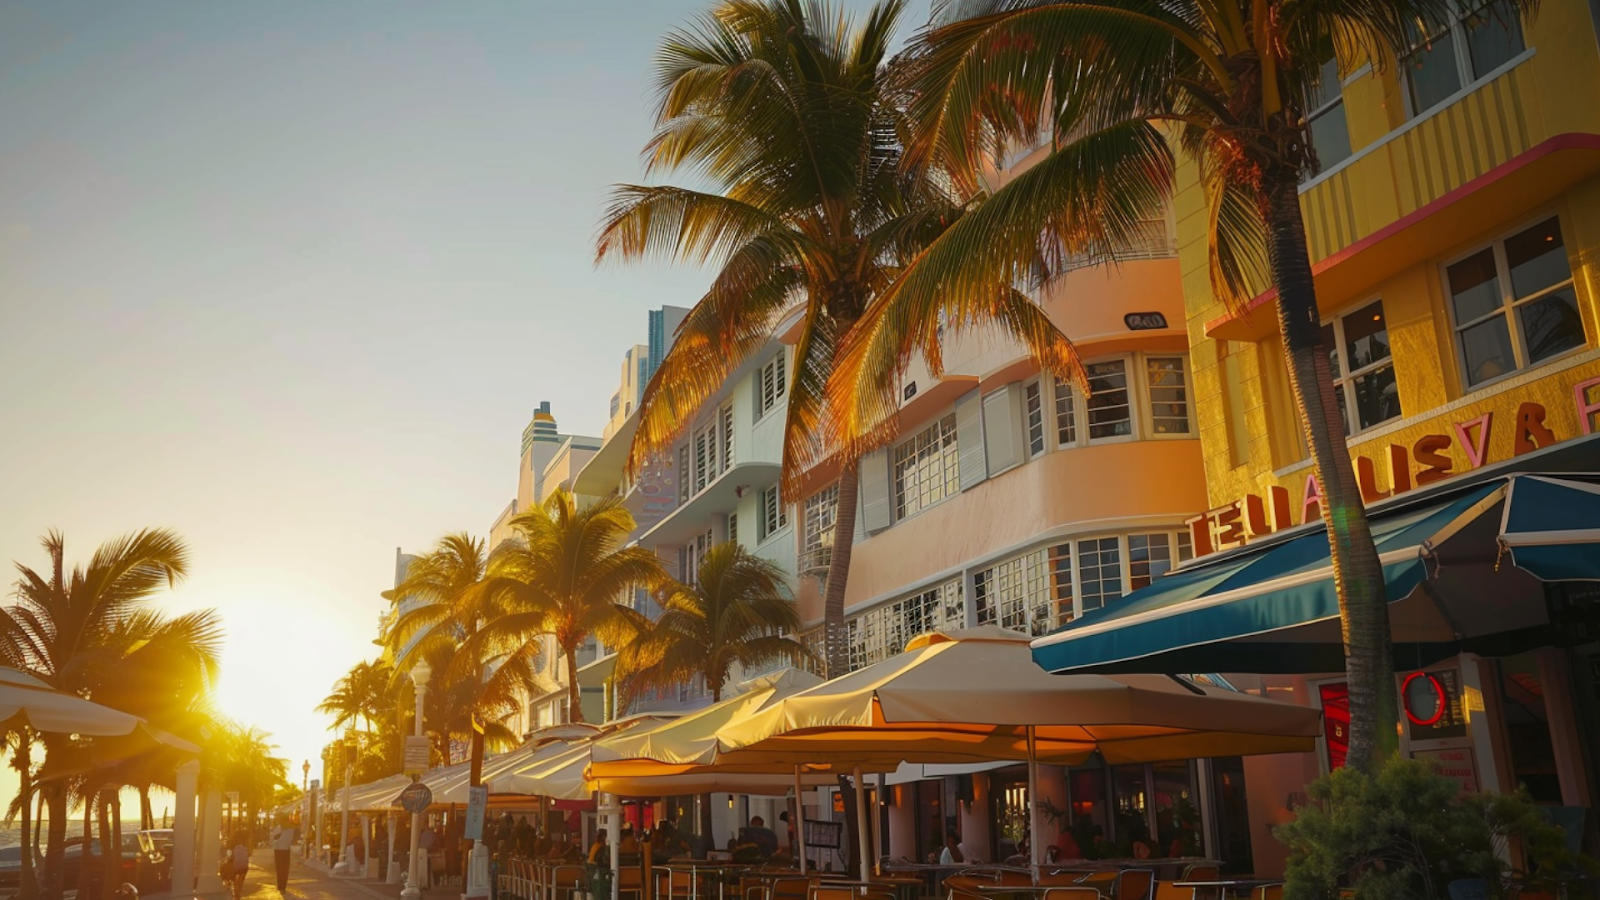 South Beach atmosphere with Art Deco buildings at golden hour.